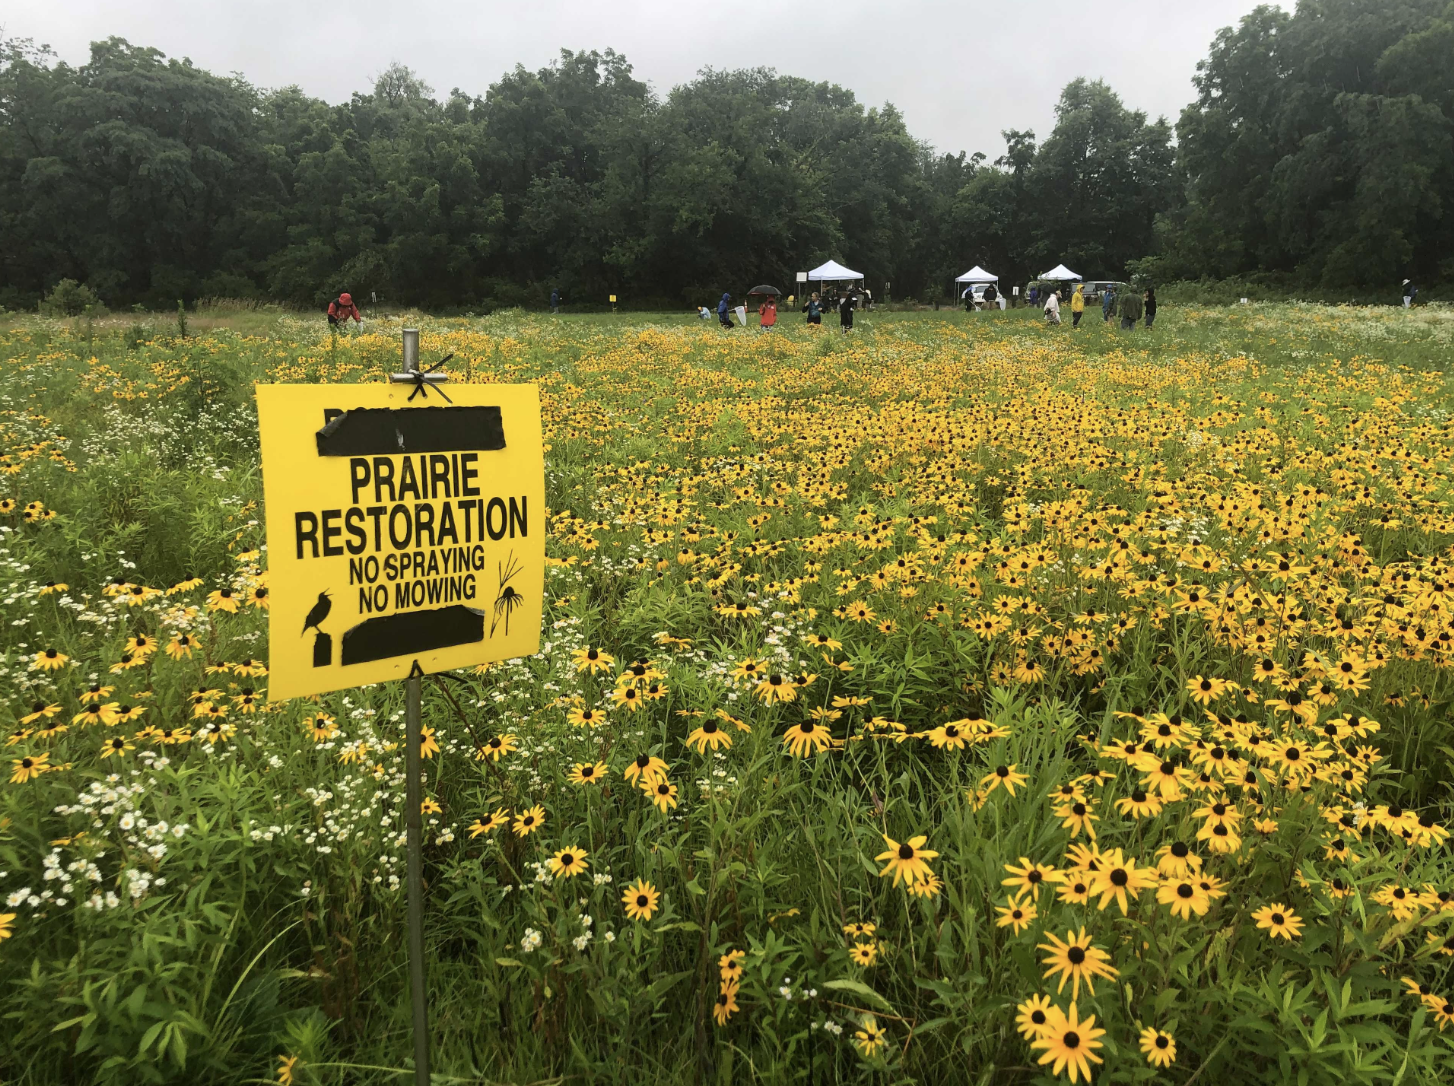 prairie in bloom with yellow flowers and a sign